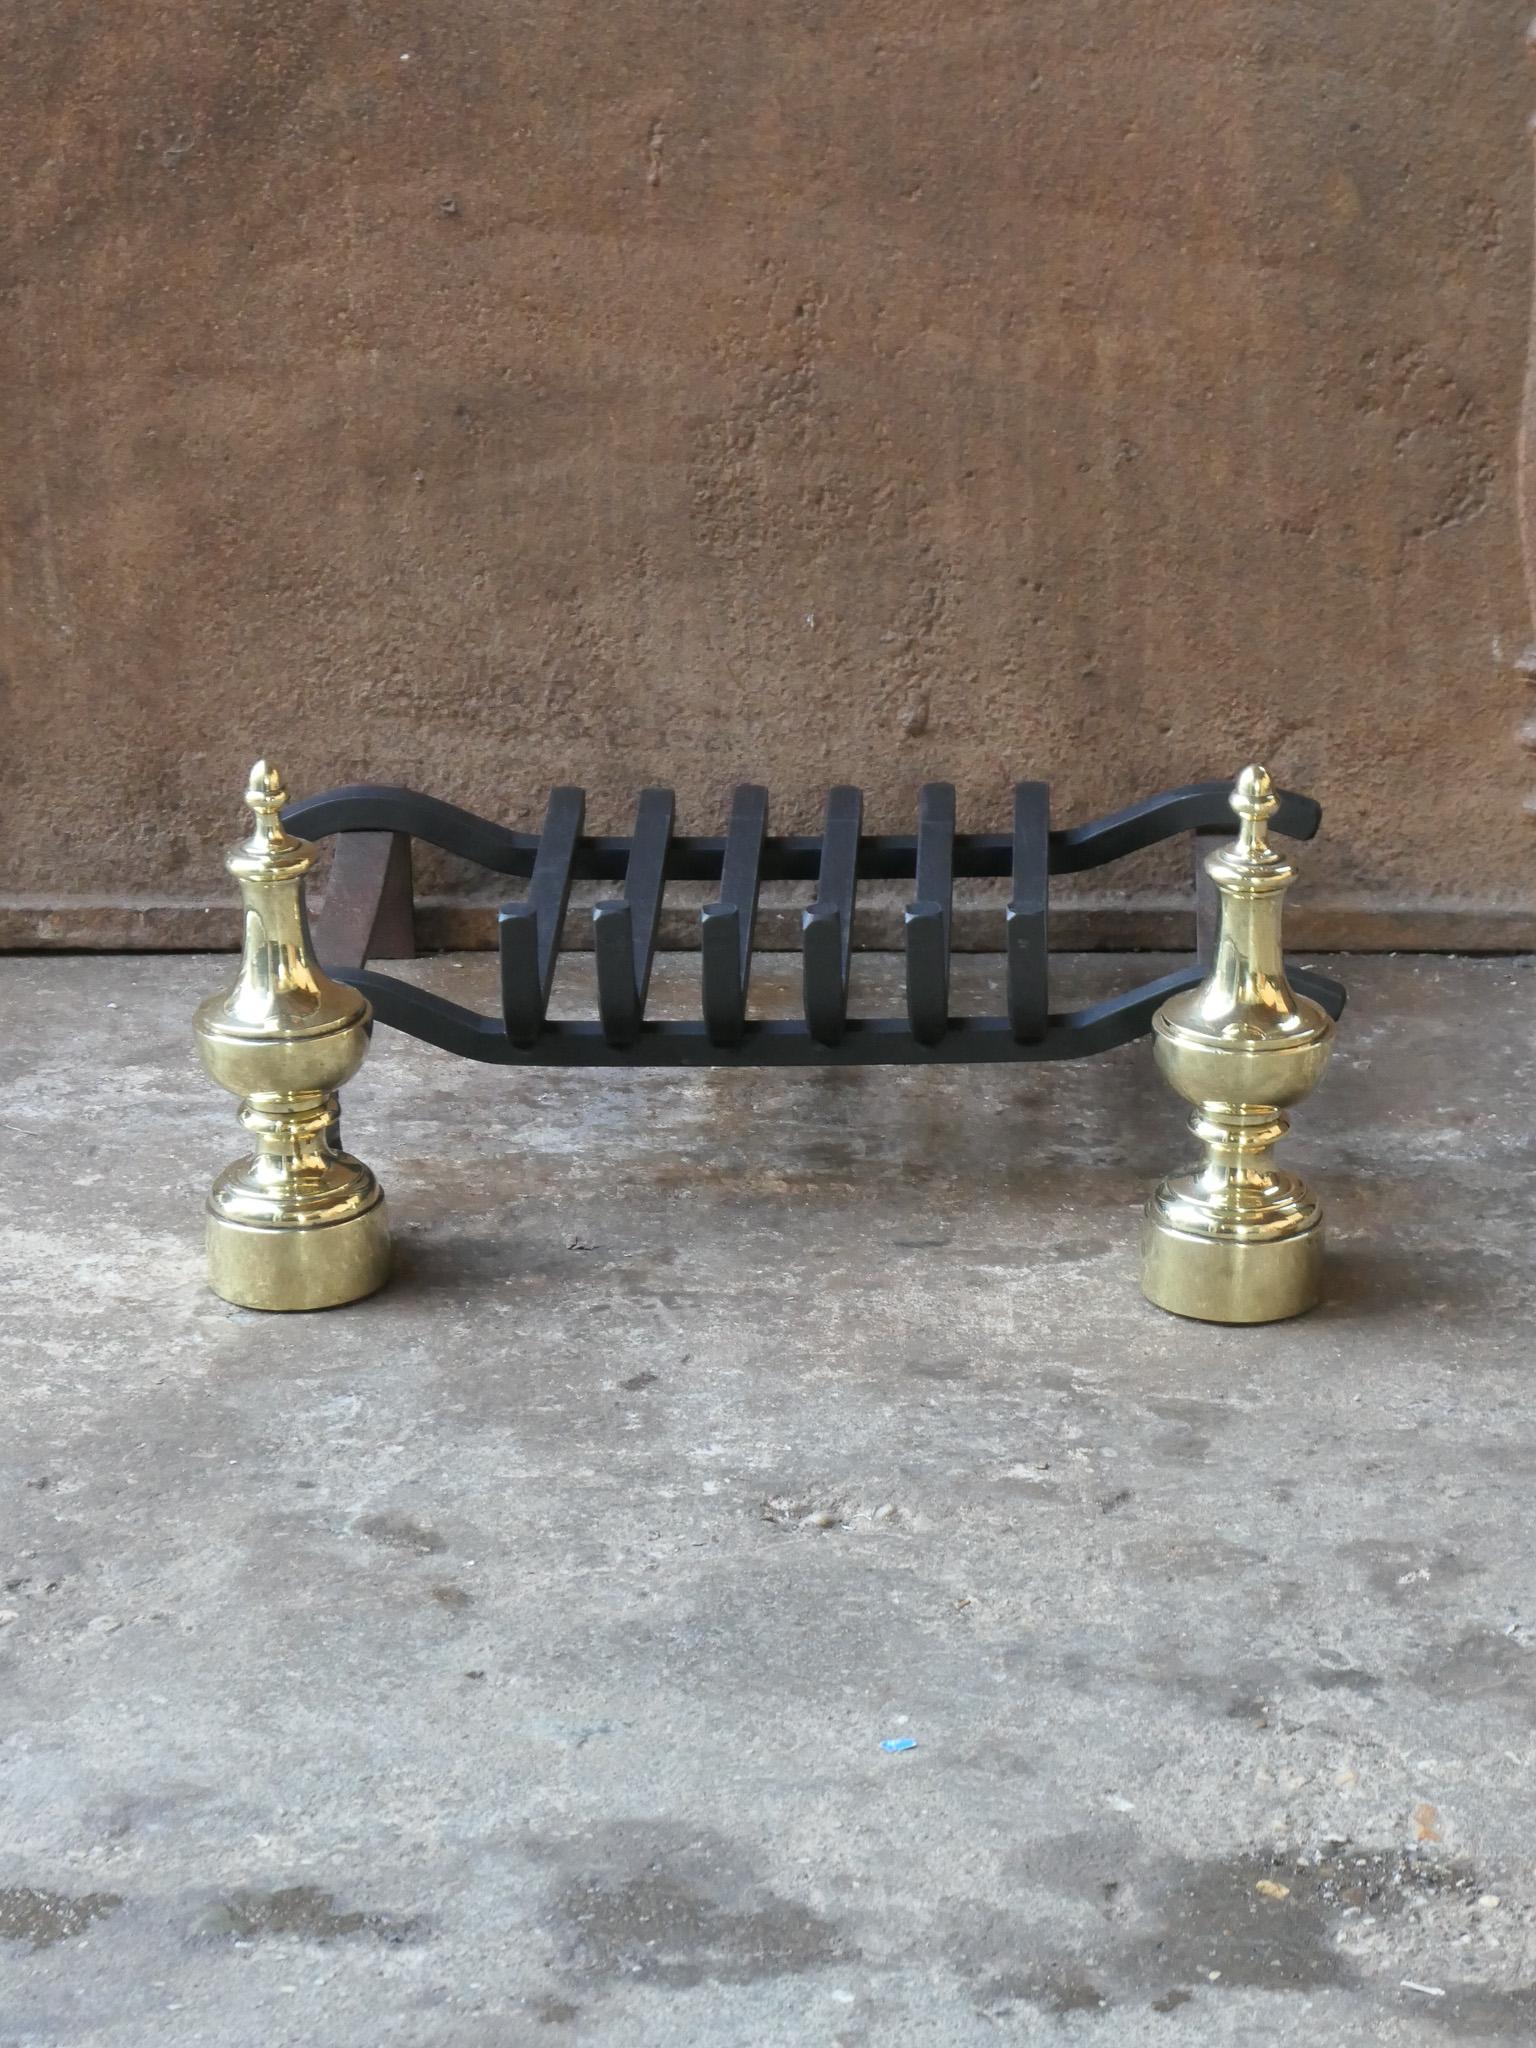 19th century French Napoleon III fireplace grate, made of wrought iron and polished brass. The basket is in a good condition and is fully functional.